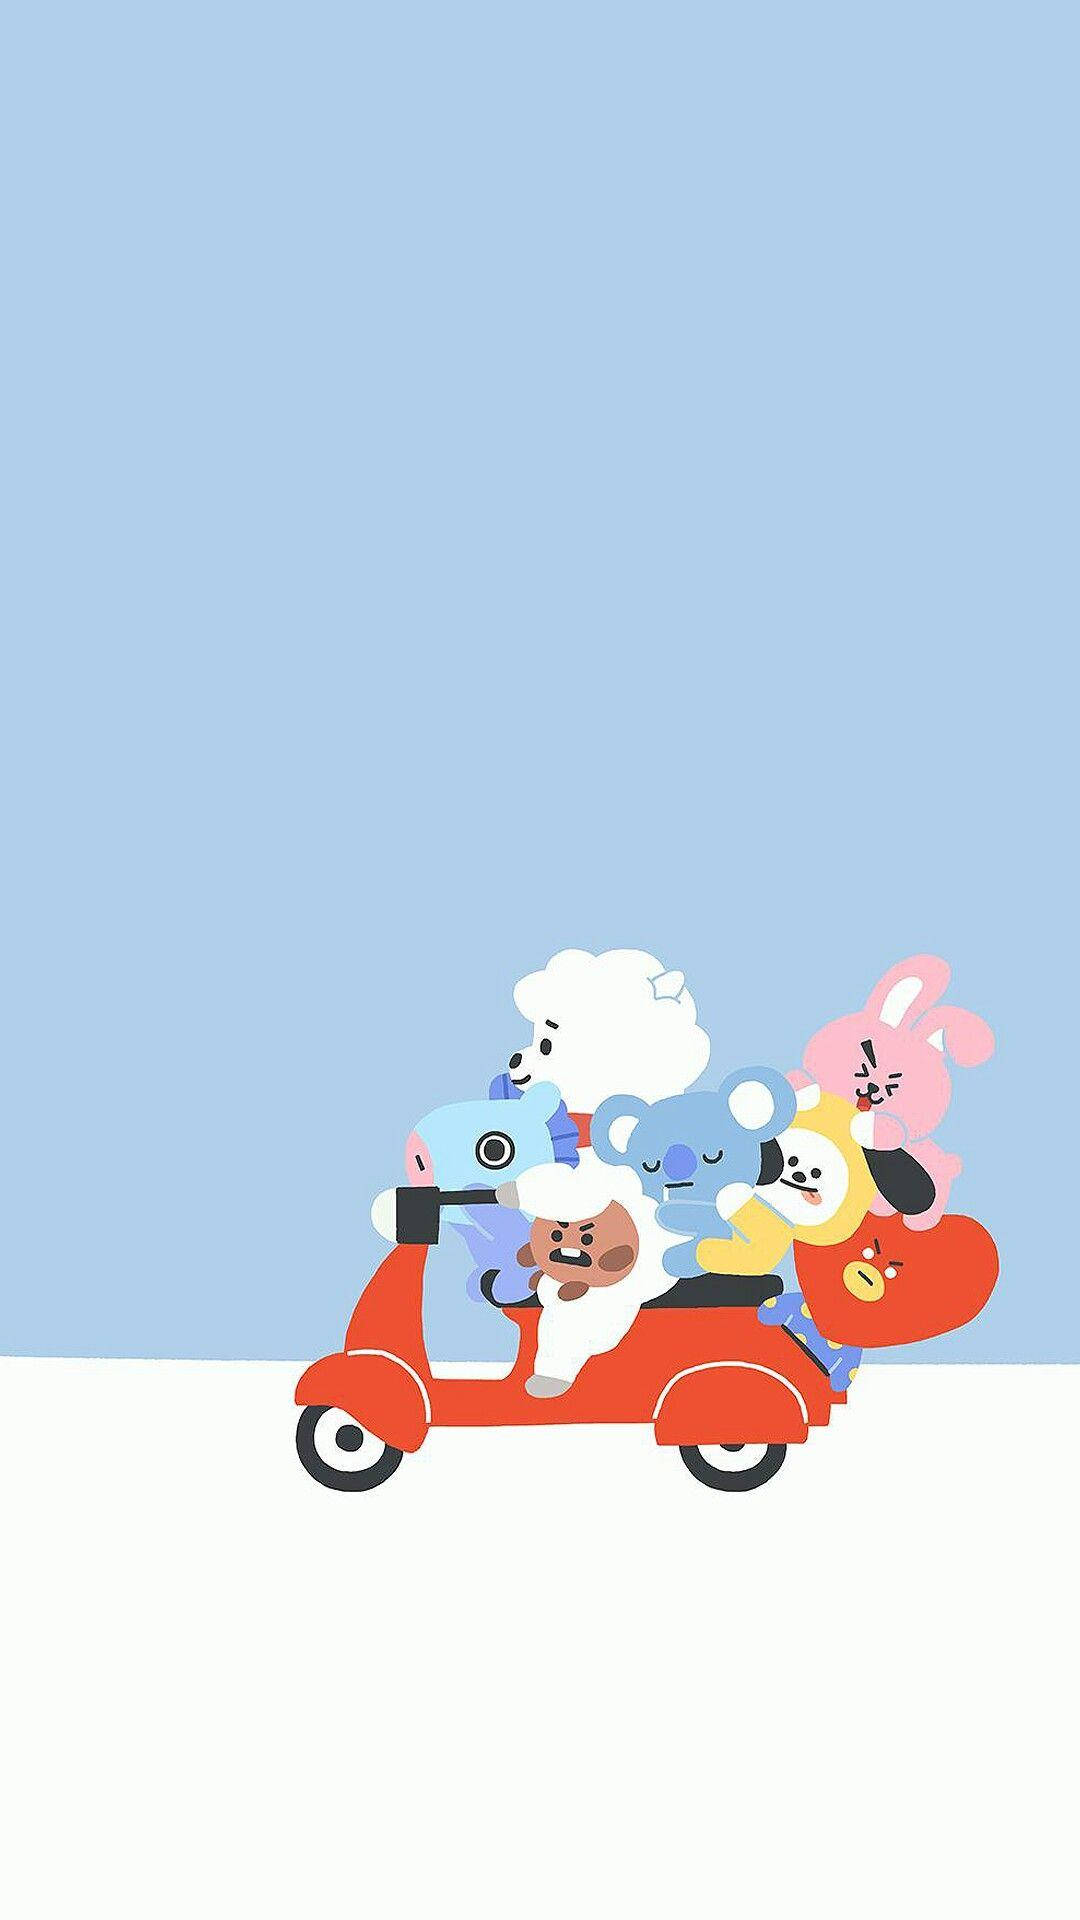 Cooky Bt21 In Scooter With Friends Background